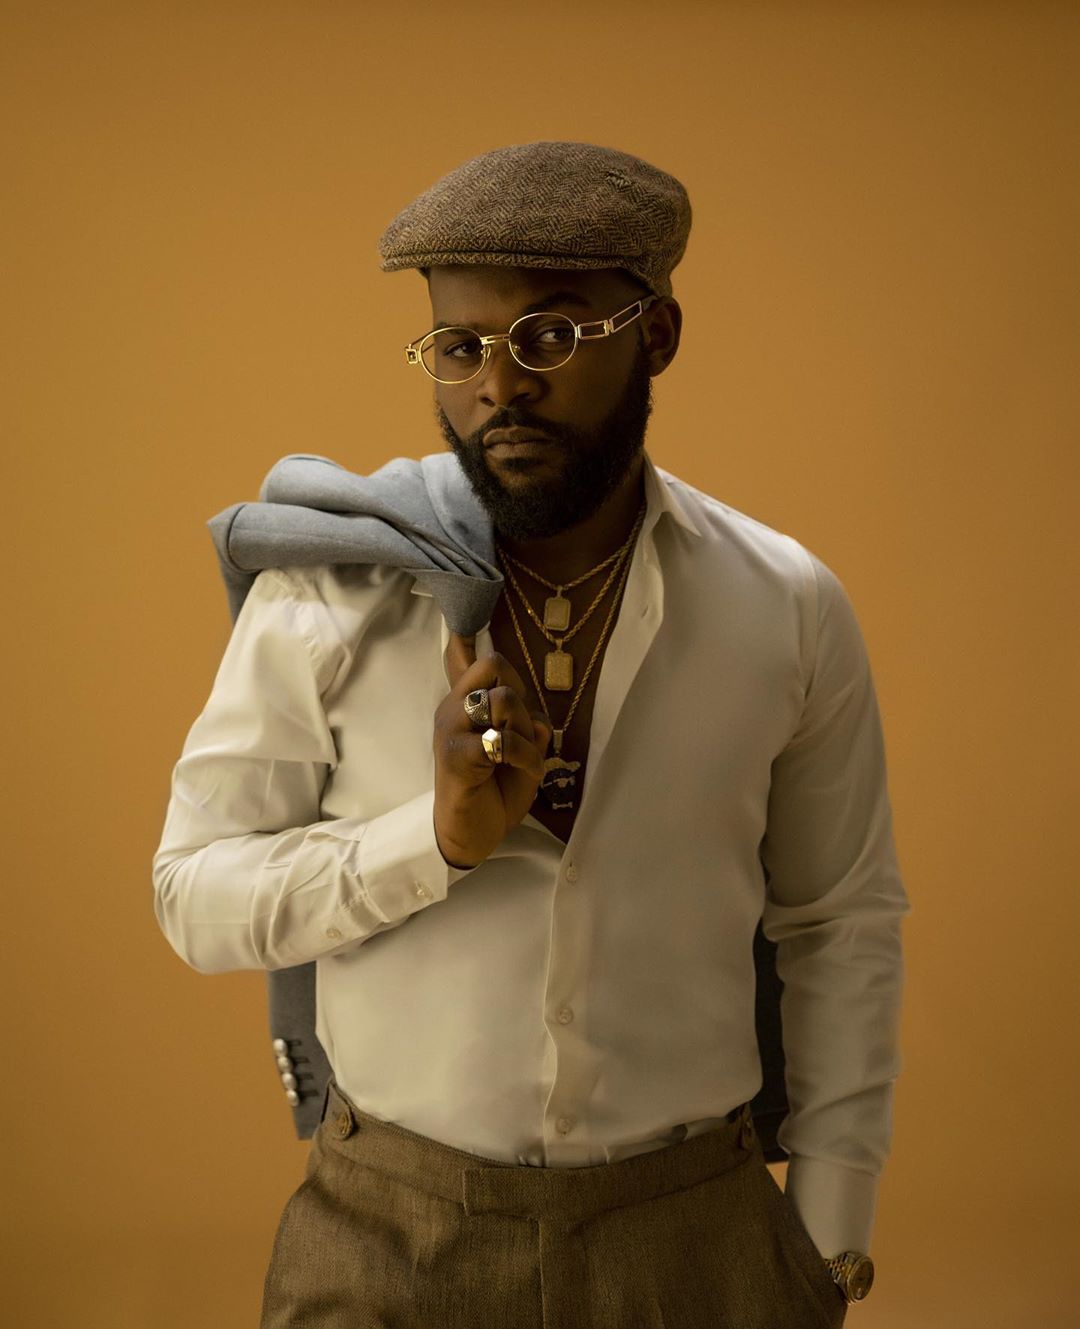 Unlike most of the guys on this list, Folarin Falana popularly known as Falz' family background has nothing to do with the entertainment industry. [Instagram/FalzTheBadtGuy]